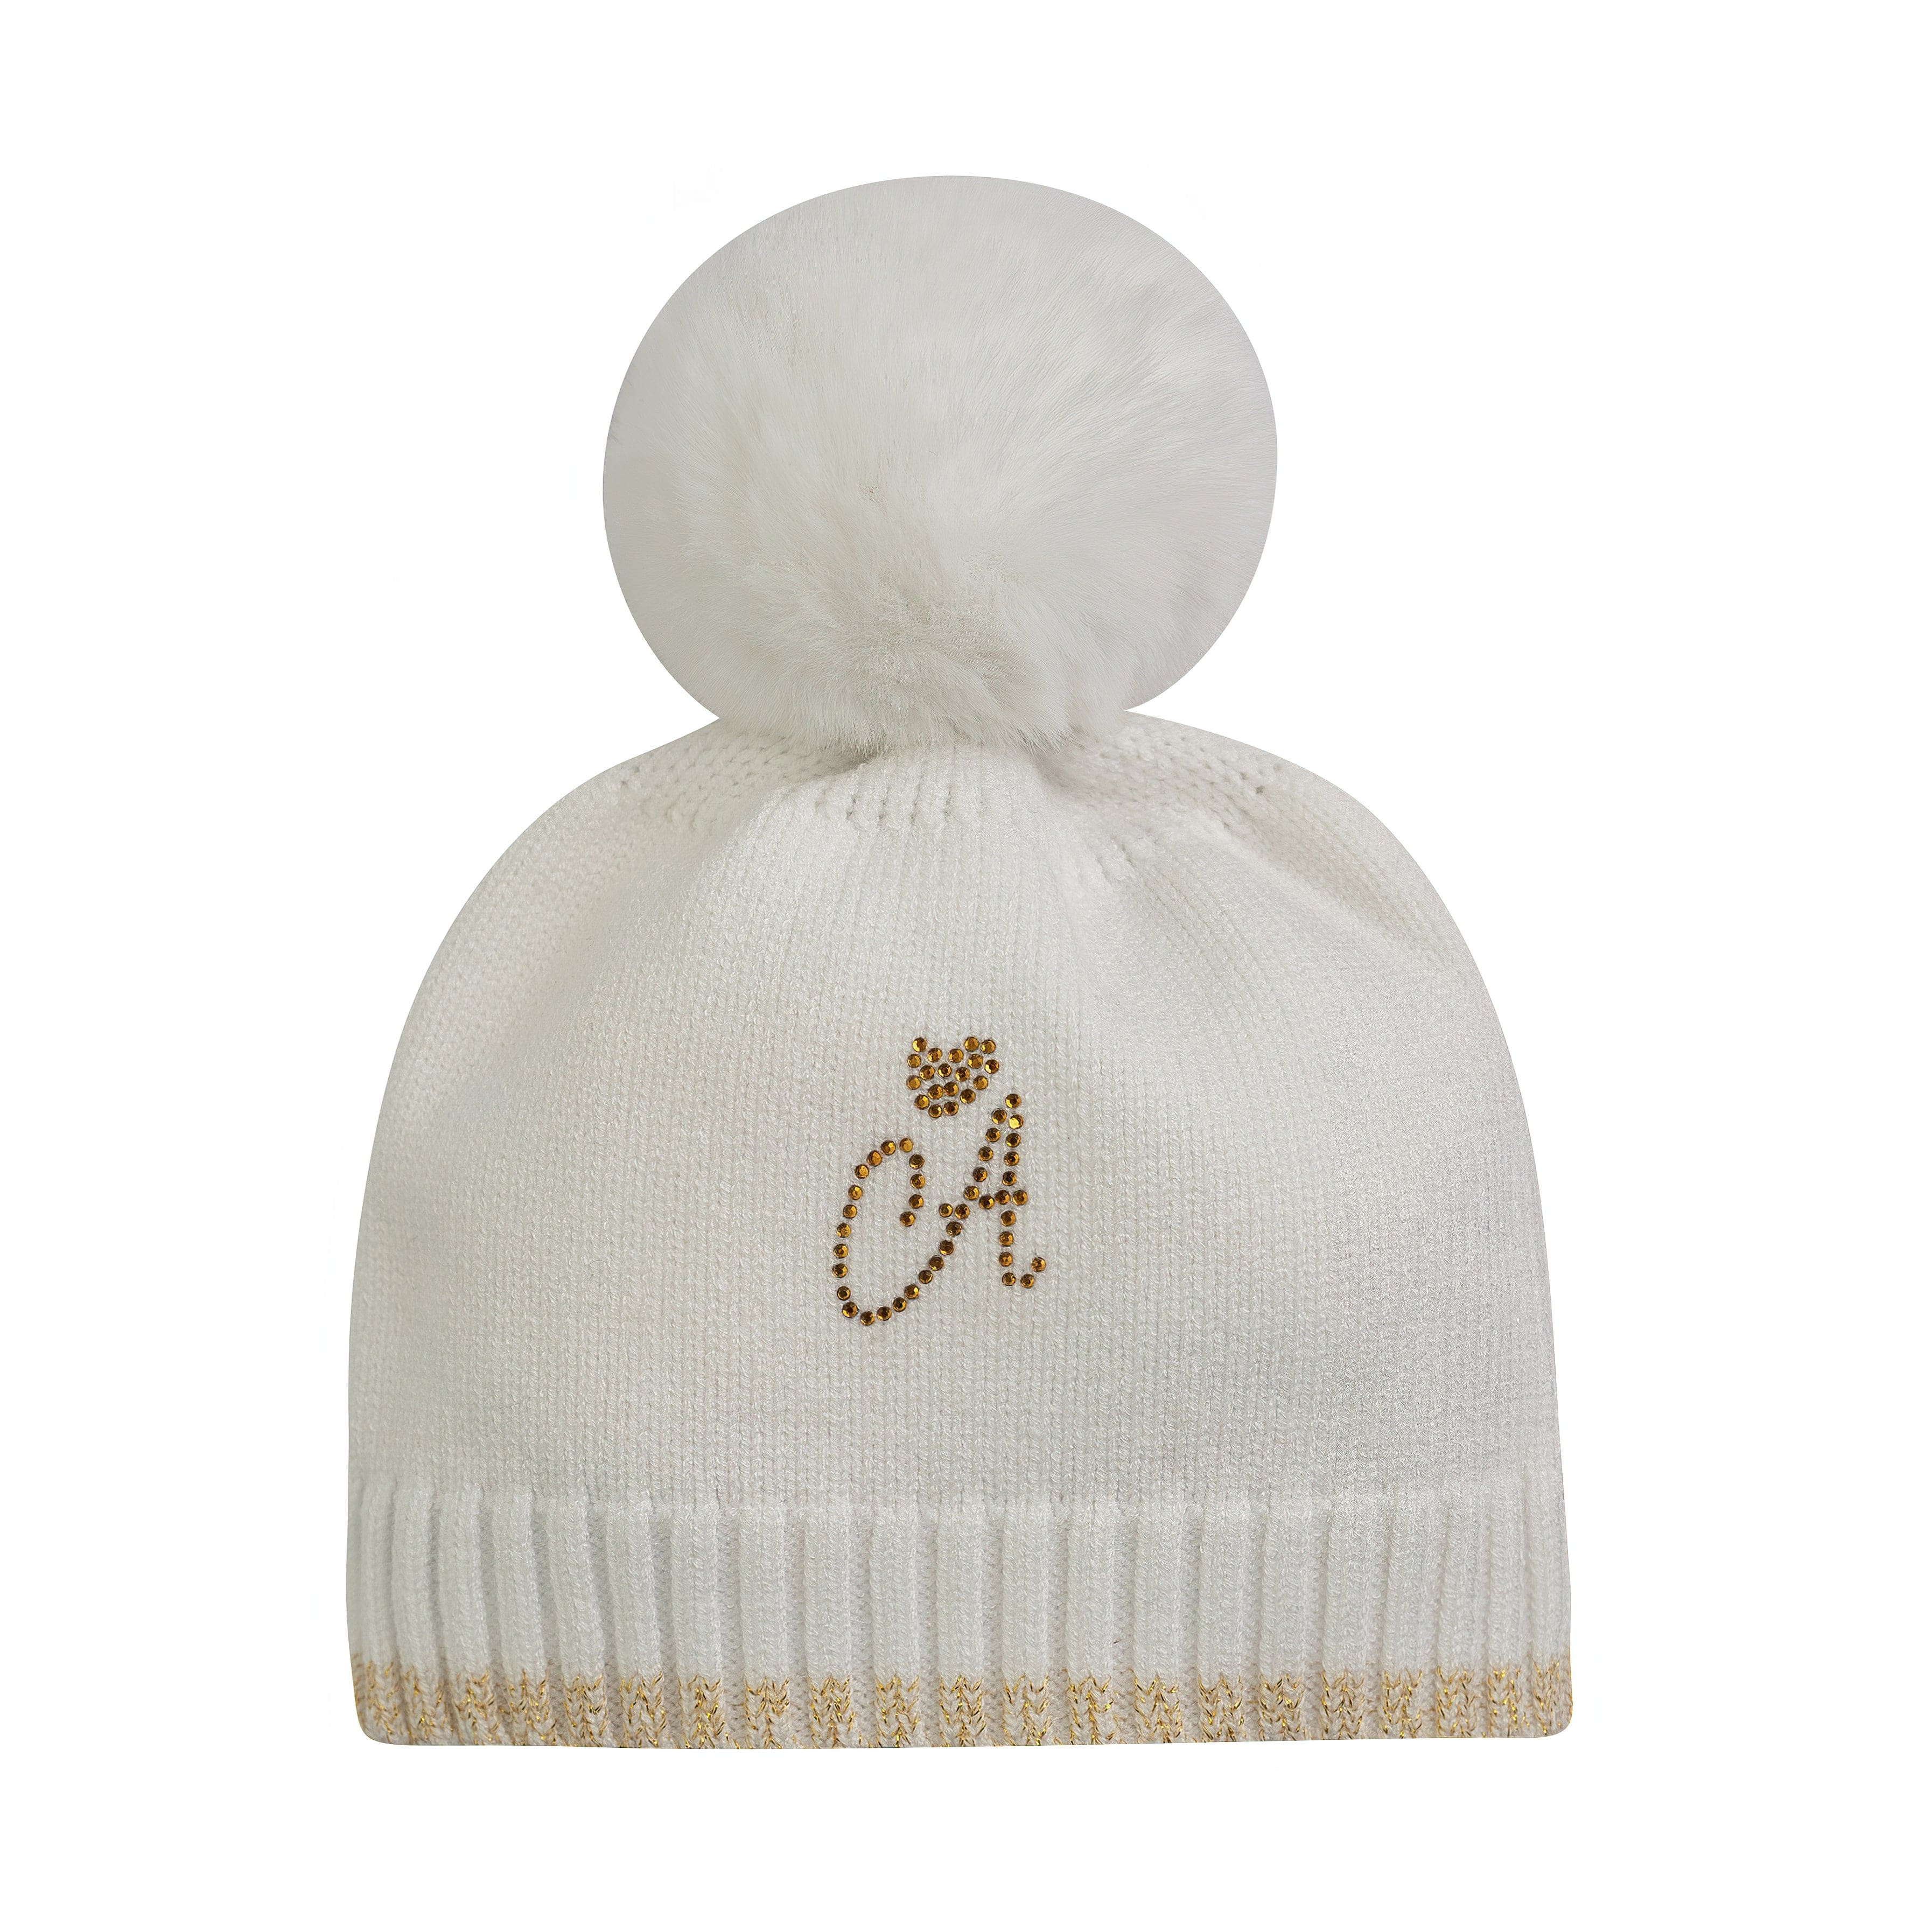 LITTLE A - Check Me Out Emberley KnittedPom Pom Hat - White